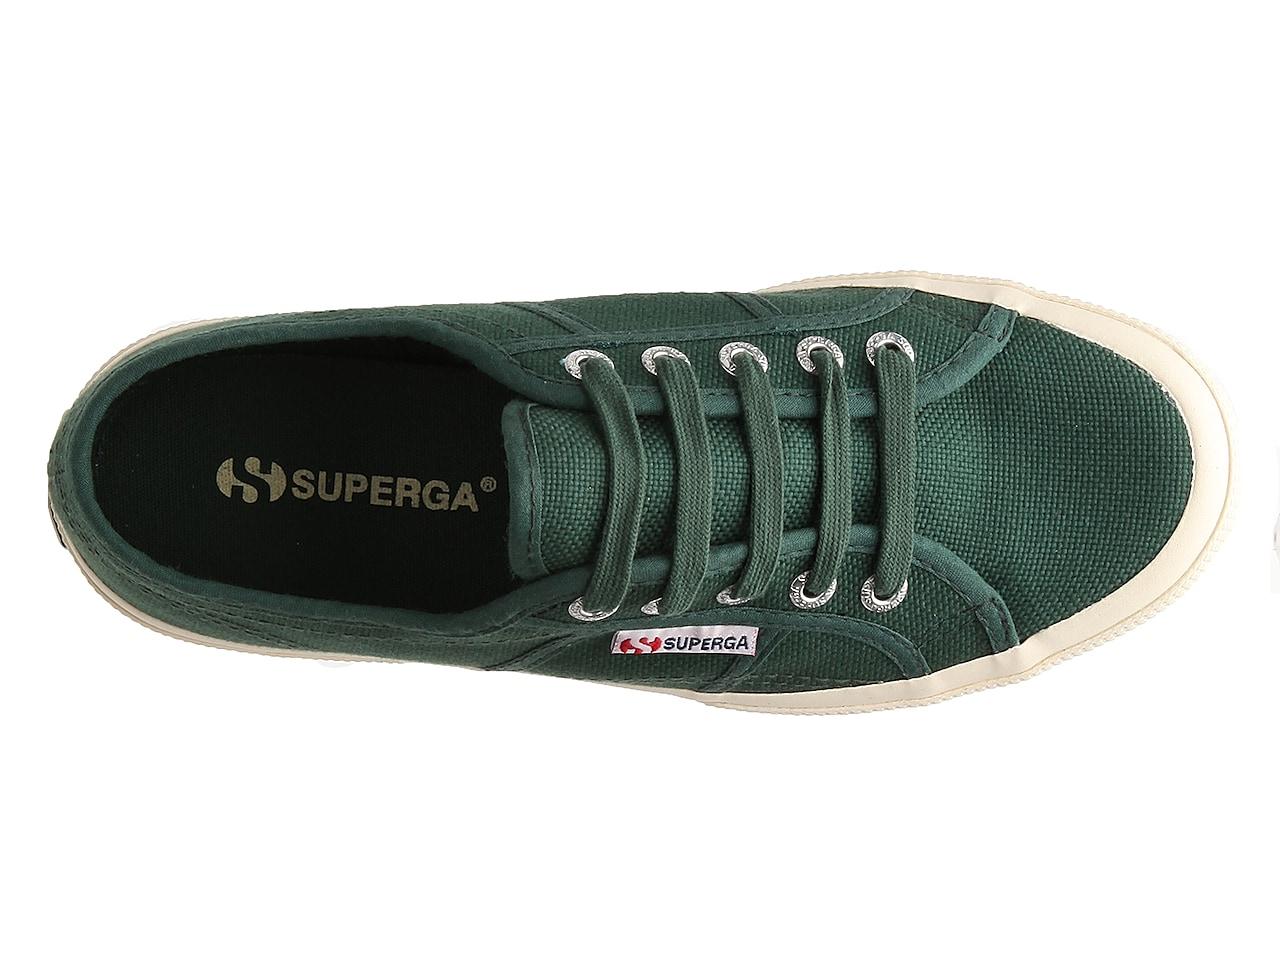 Superga Canvas 2750 Cotu Classic Sneaker in Forest Green (Green) | Lyst